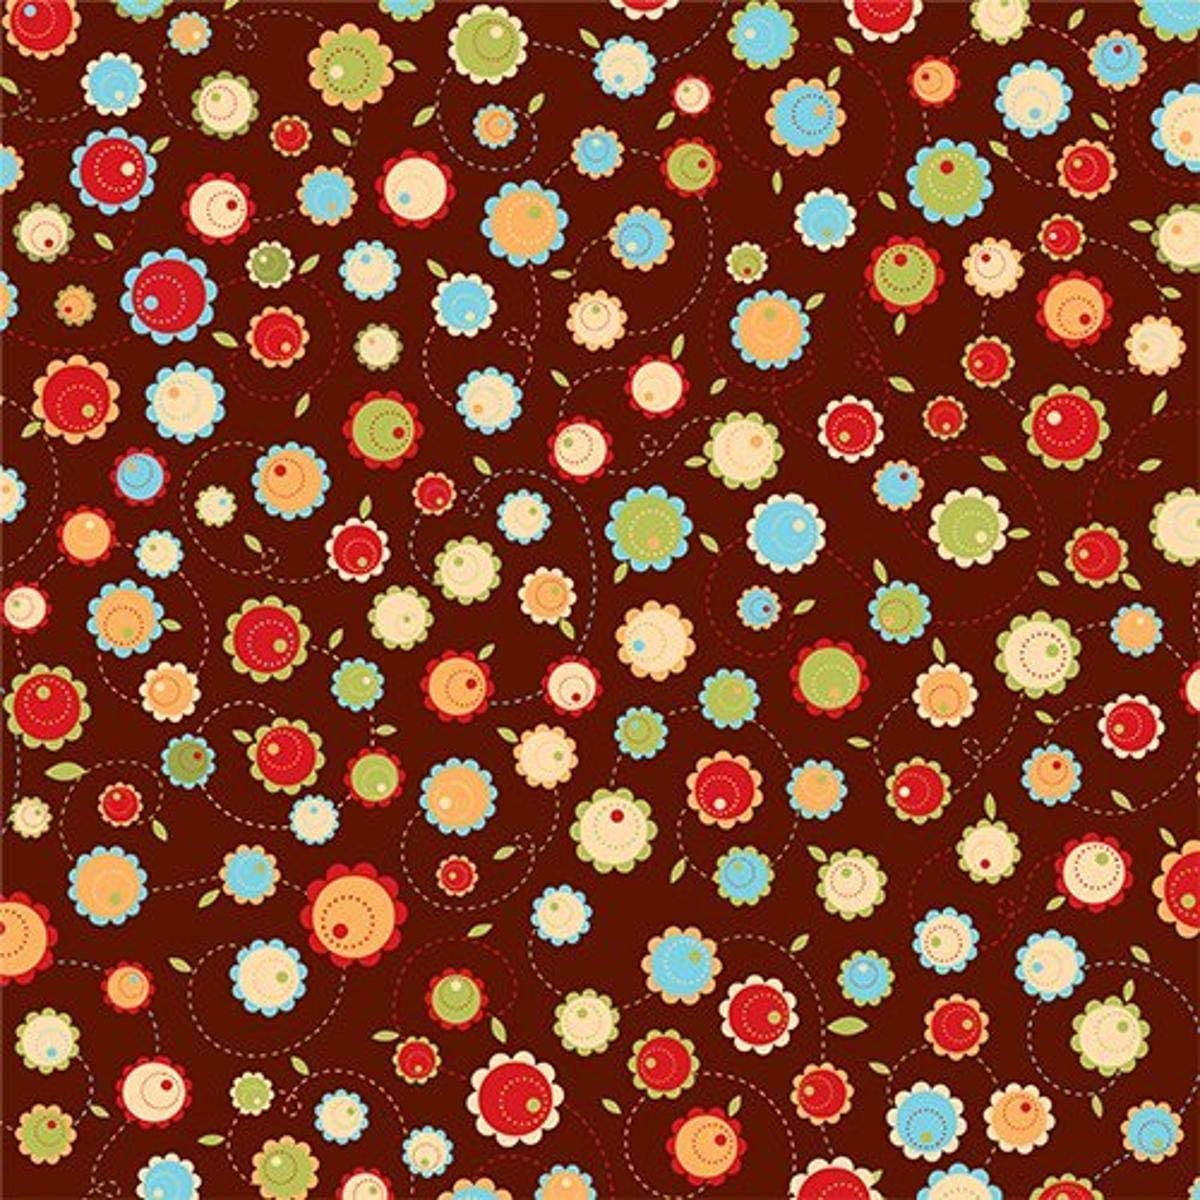 Multi-colored (red, butter yellow, lime green, sky blue, round flowers with squiggly dotted lines on brown background) Printed on one side. Smooth surface